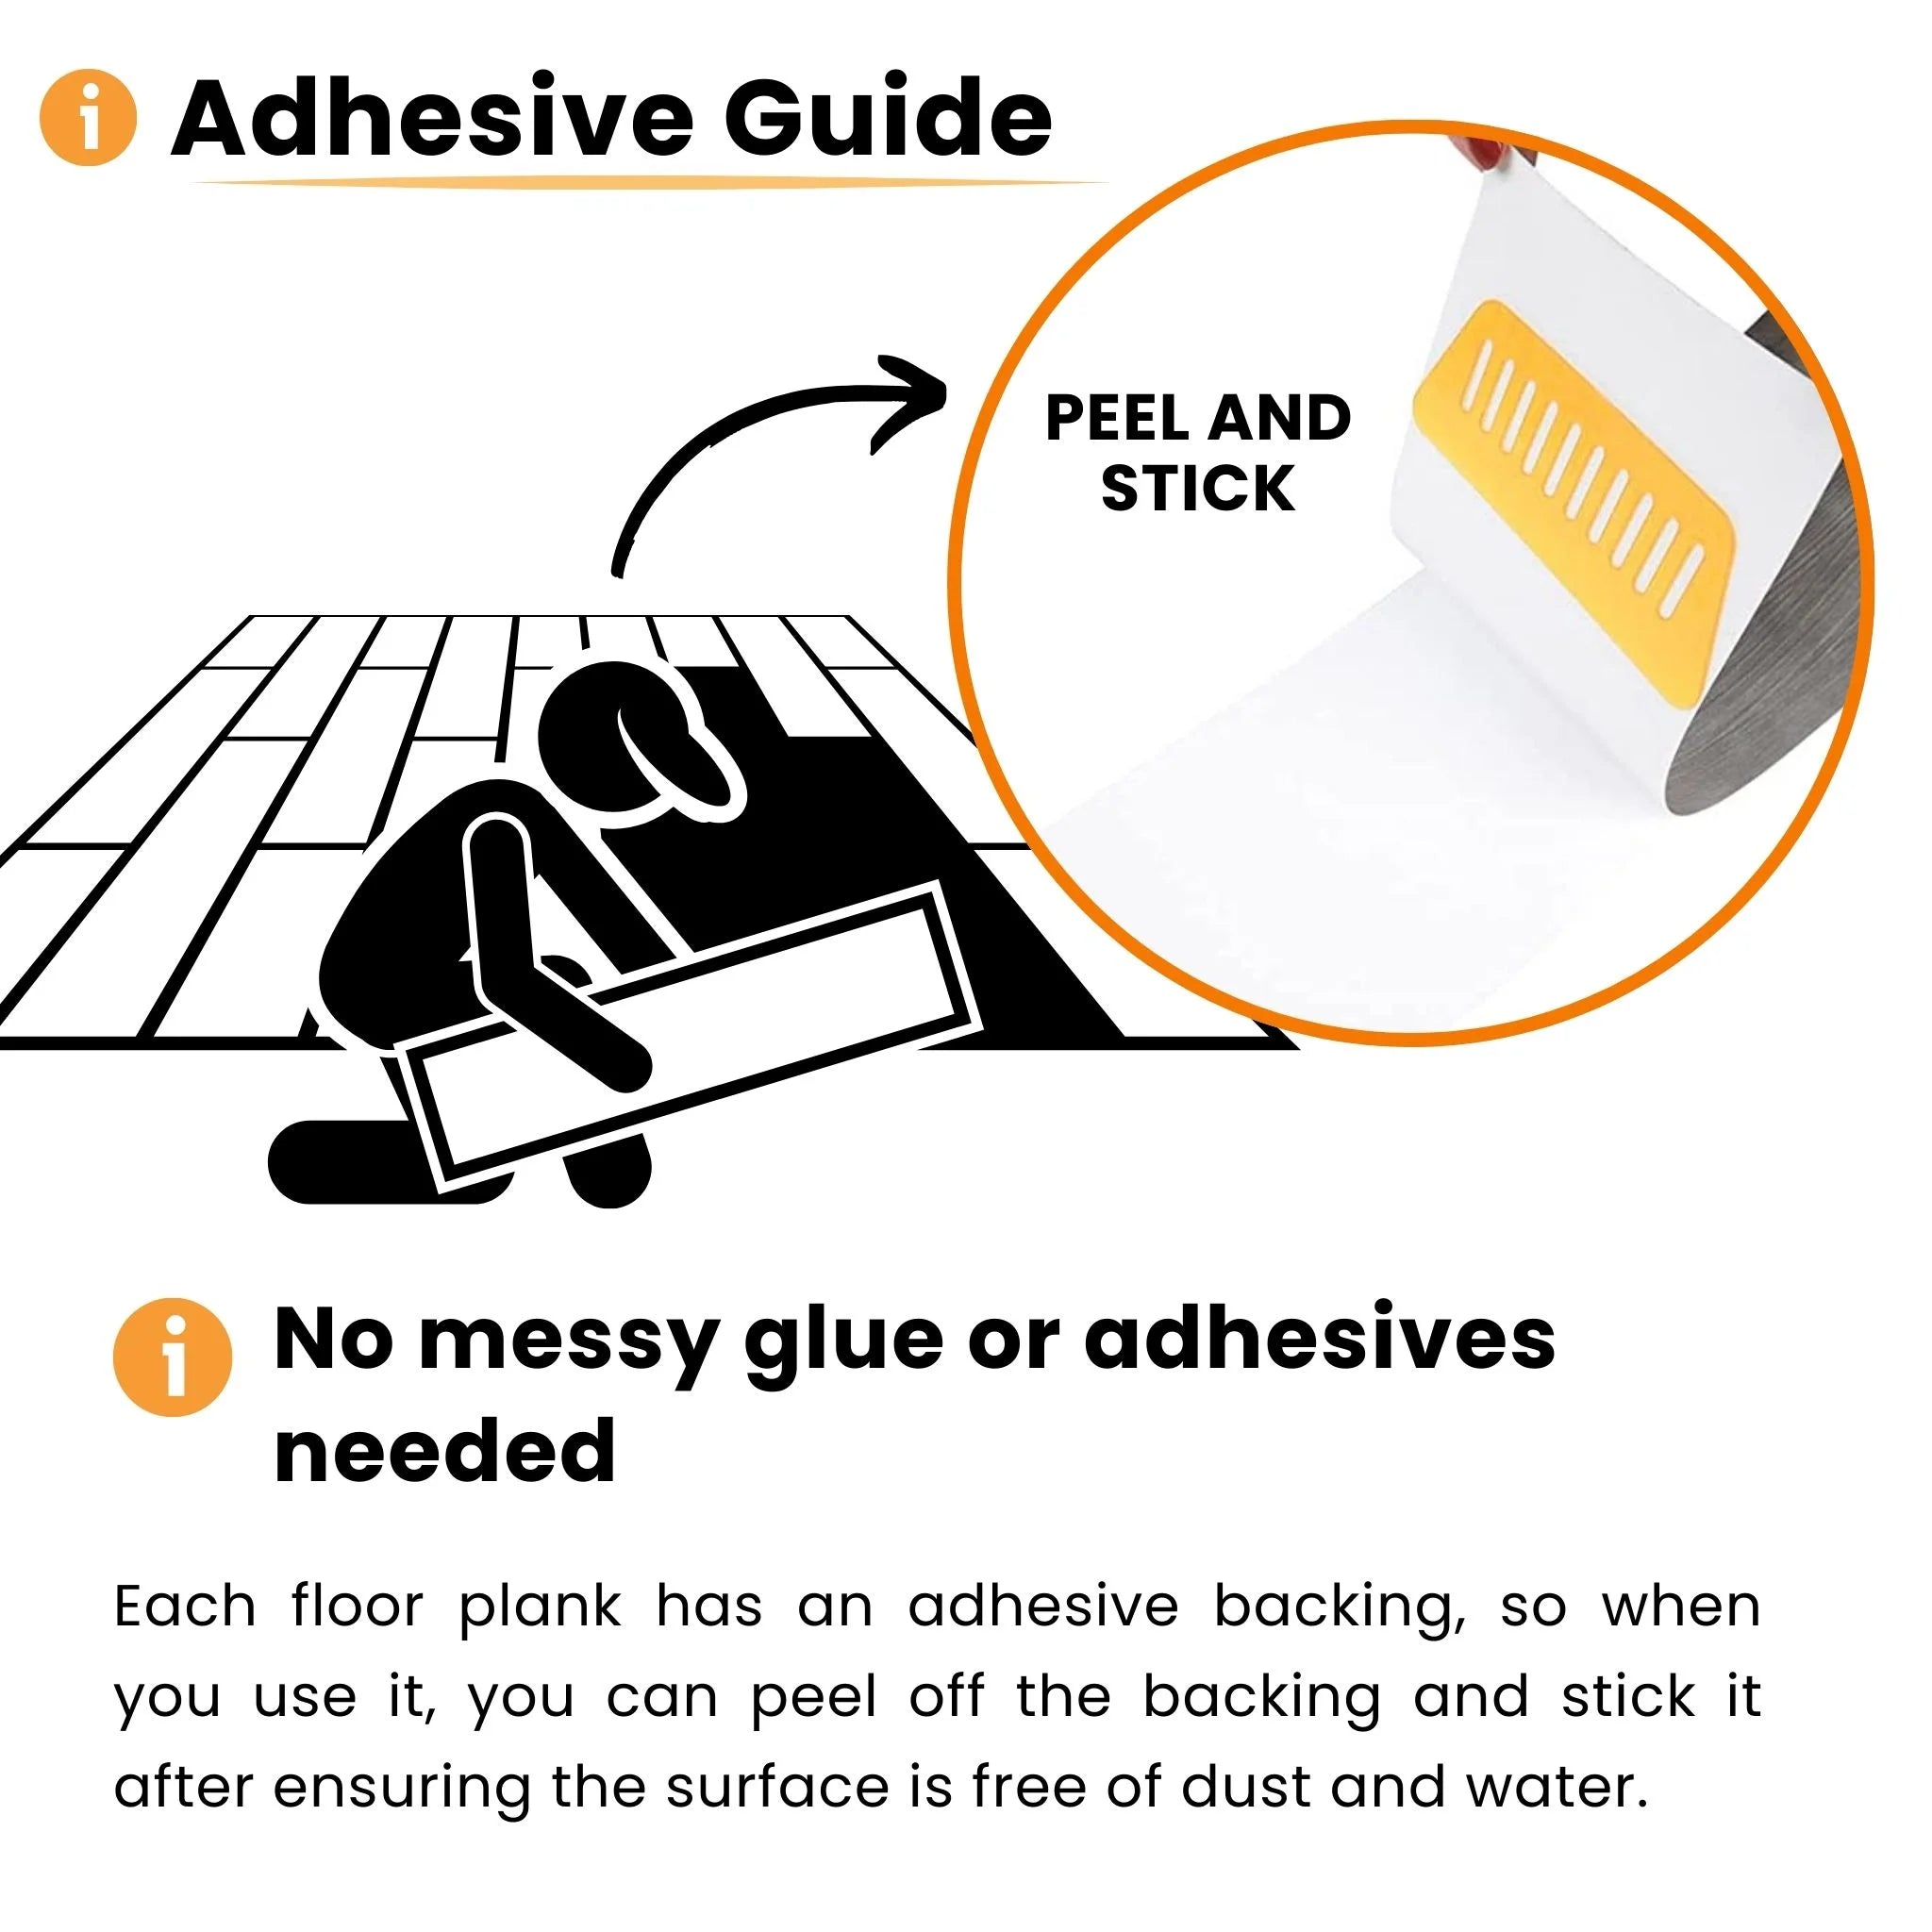 adhesive guide illustration for floor tiles with peel and stick method